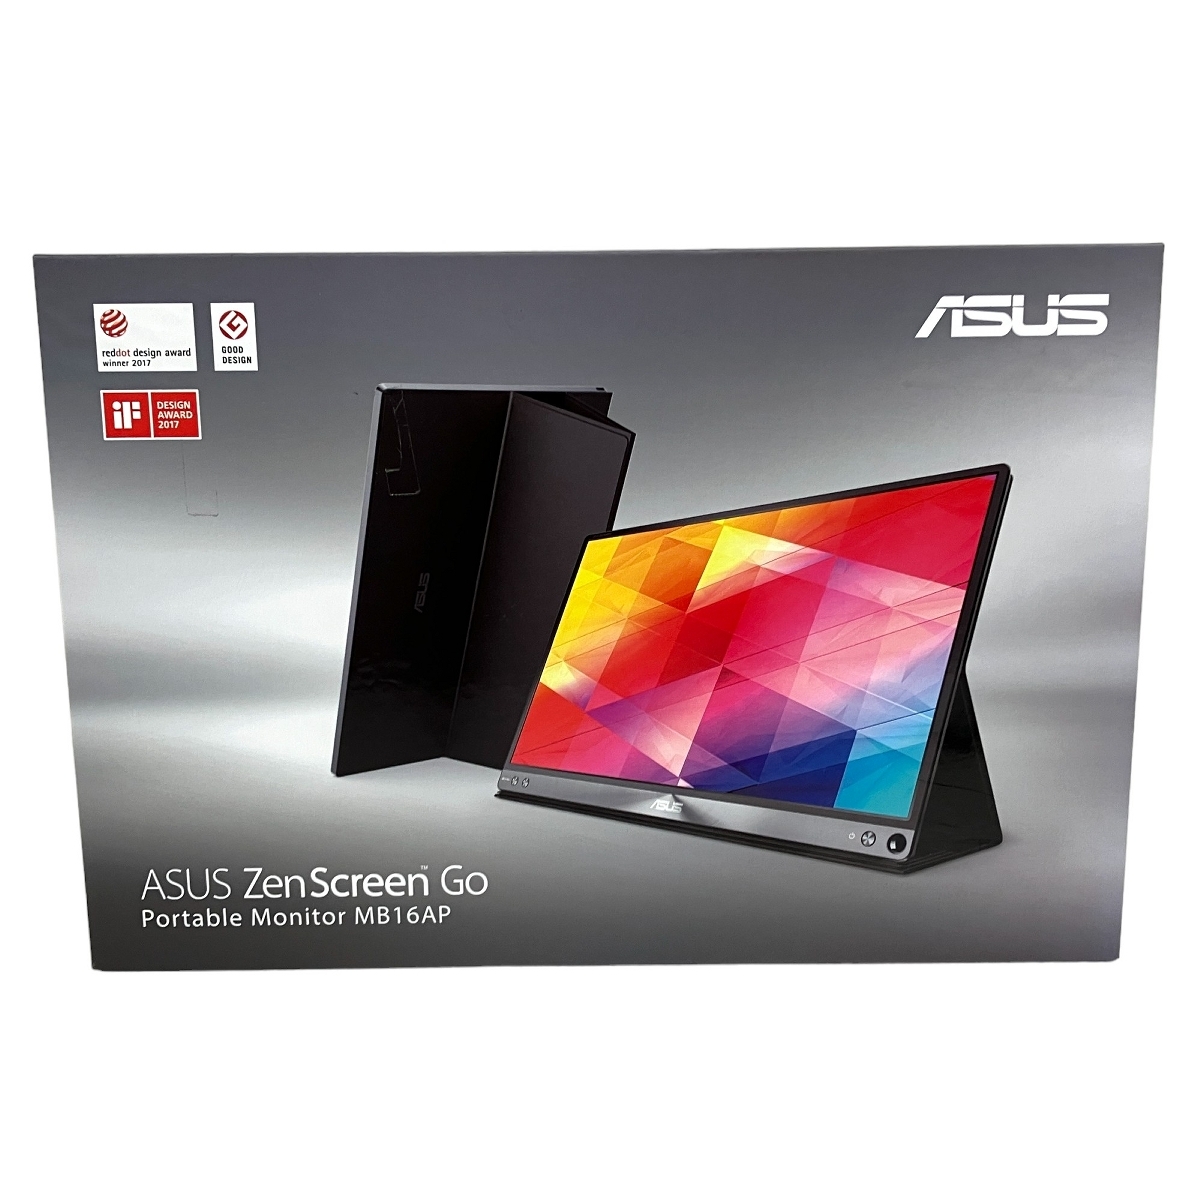 [ operation guarantee ] ASUS ZenScreen GO MB16AP mobile monitor display PC peripherals smartphone accessory 15.6 -inch FHD used T8676026